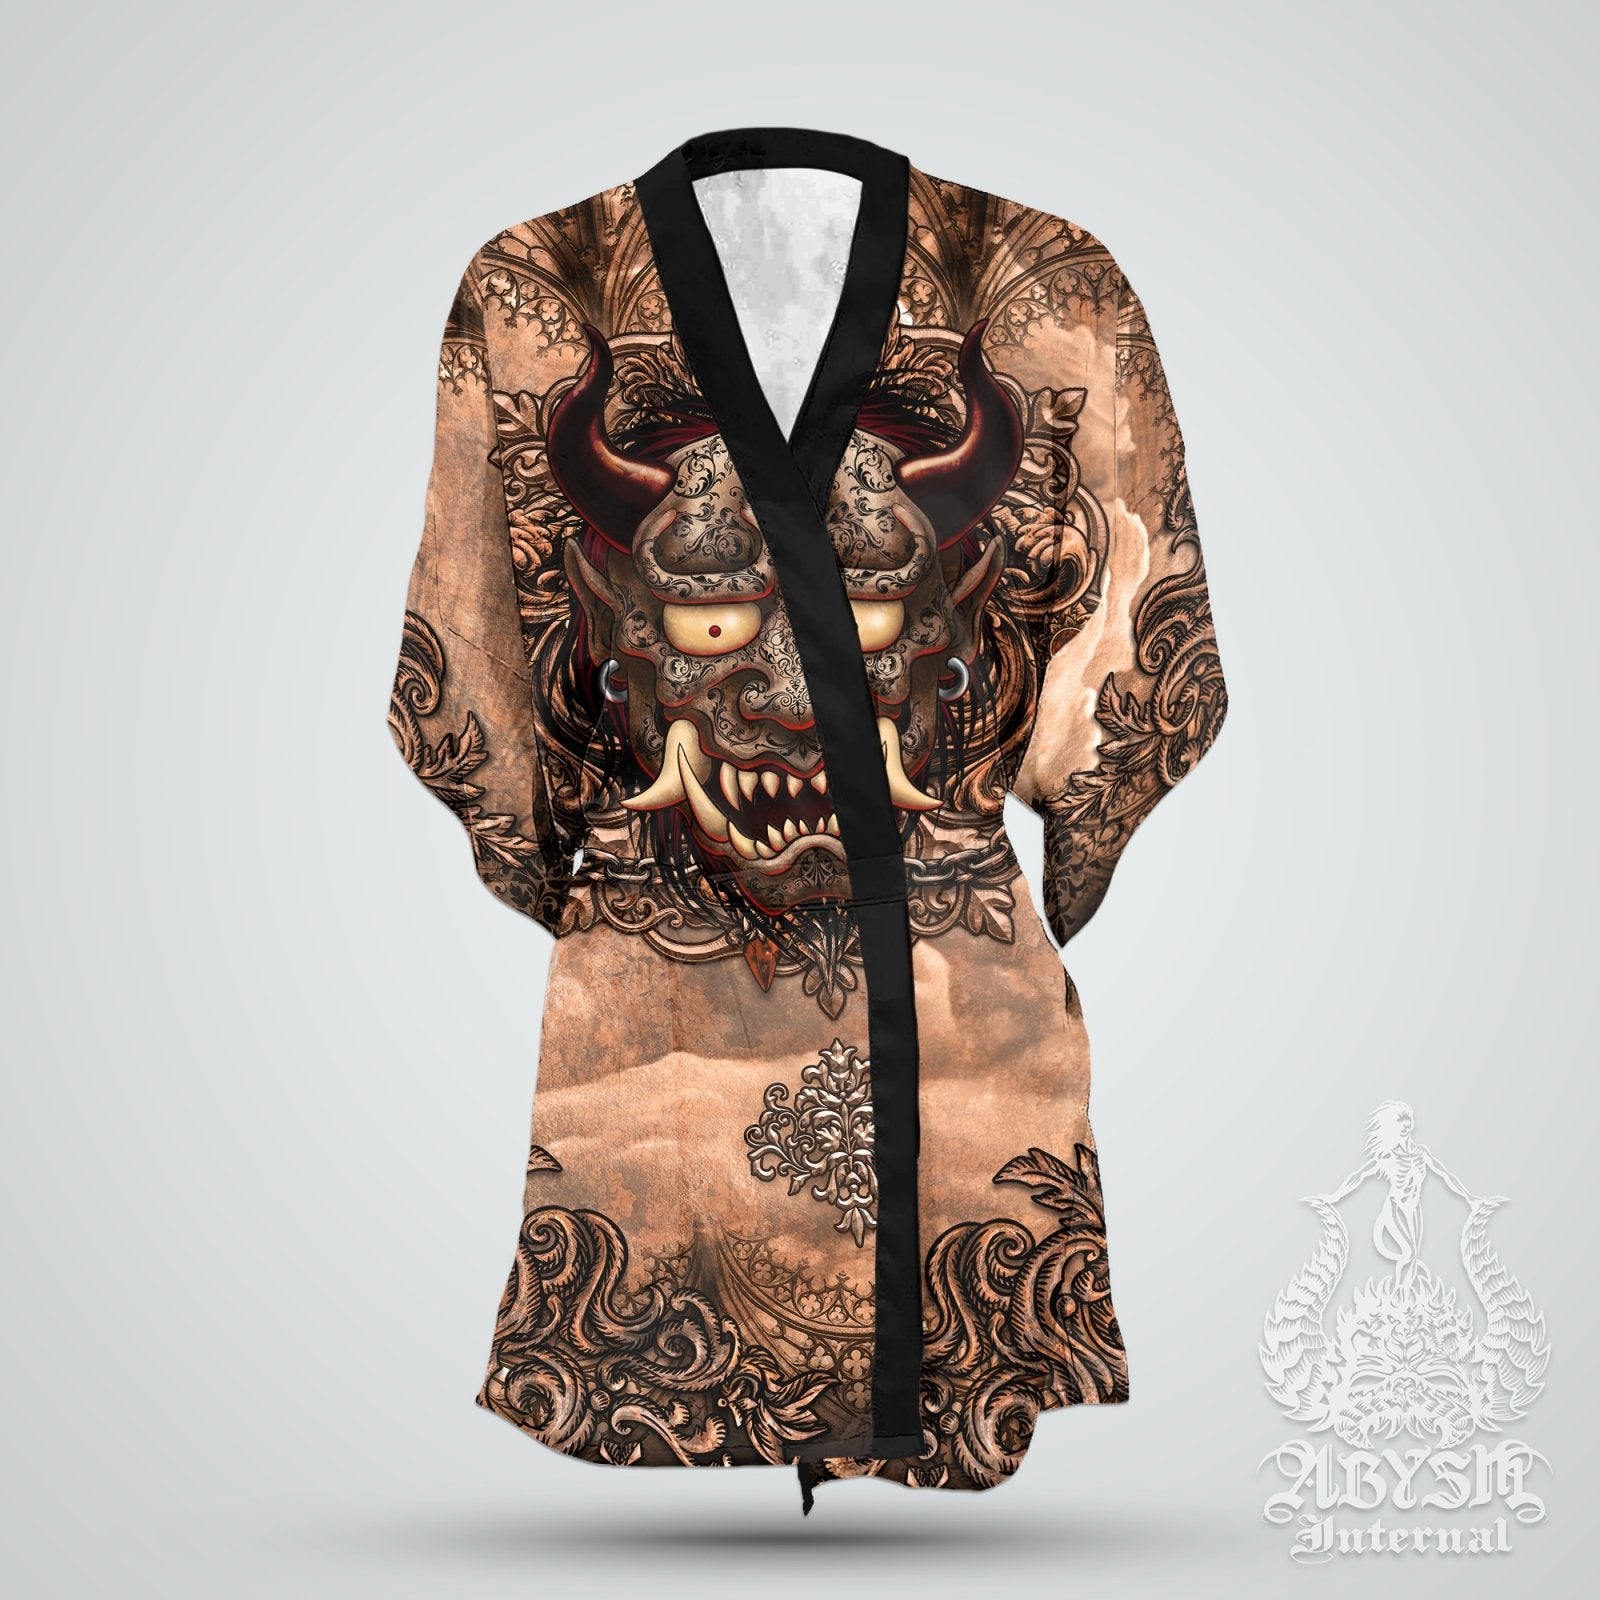 Demon Cover Up, Beach Outfit, Oni Party Kimono, Japanese Summer Festival Robe, Indie and Alternative Clothing, Unisex - Gothic Beige - Abysm Internal